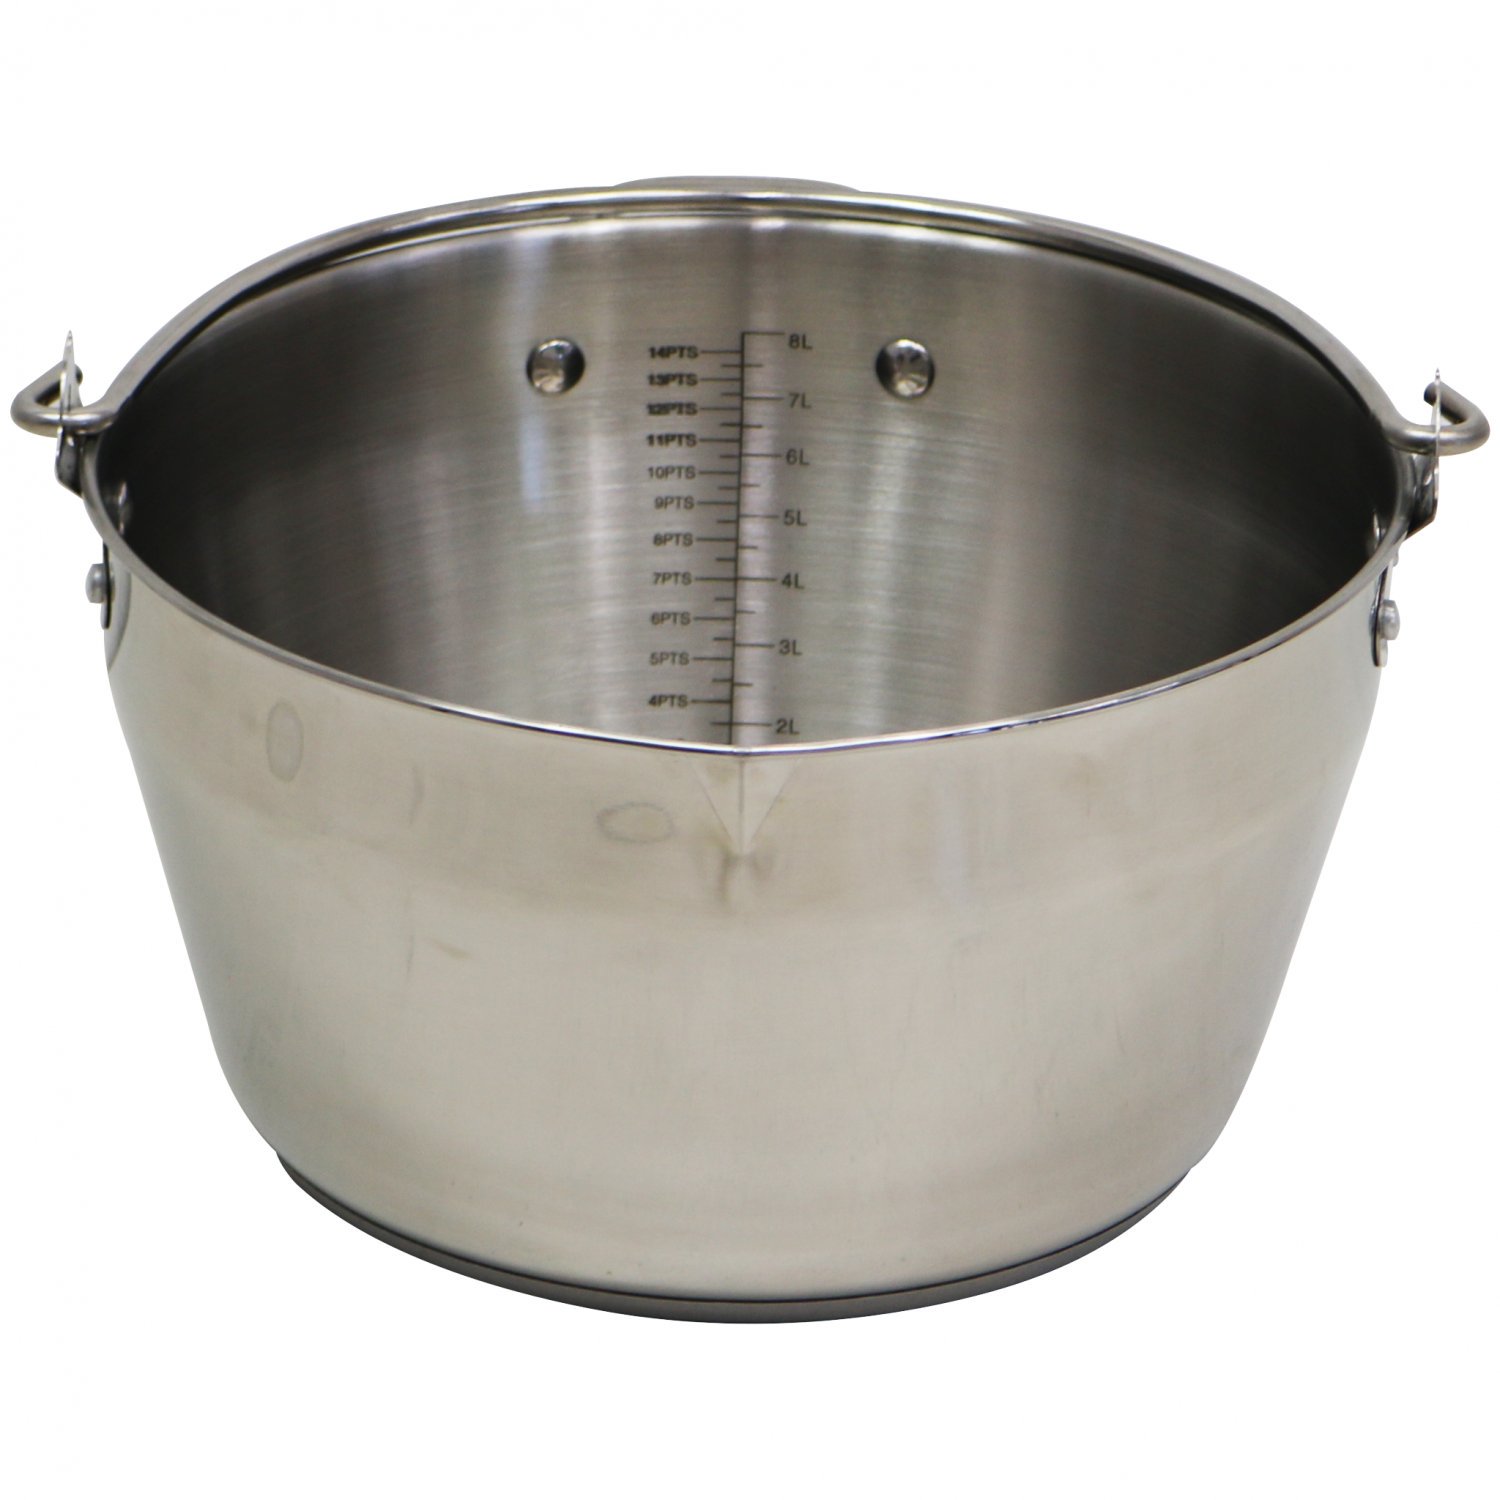 9L Stainless Steel Maslin Jam Preserving Pan with Handle